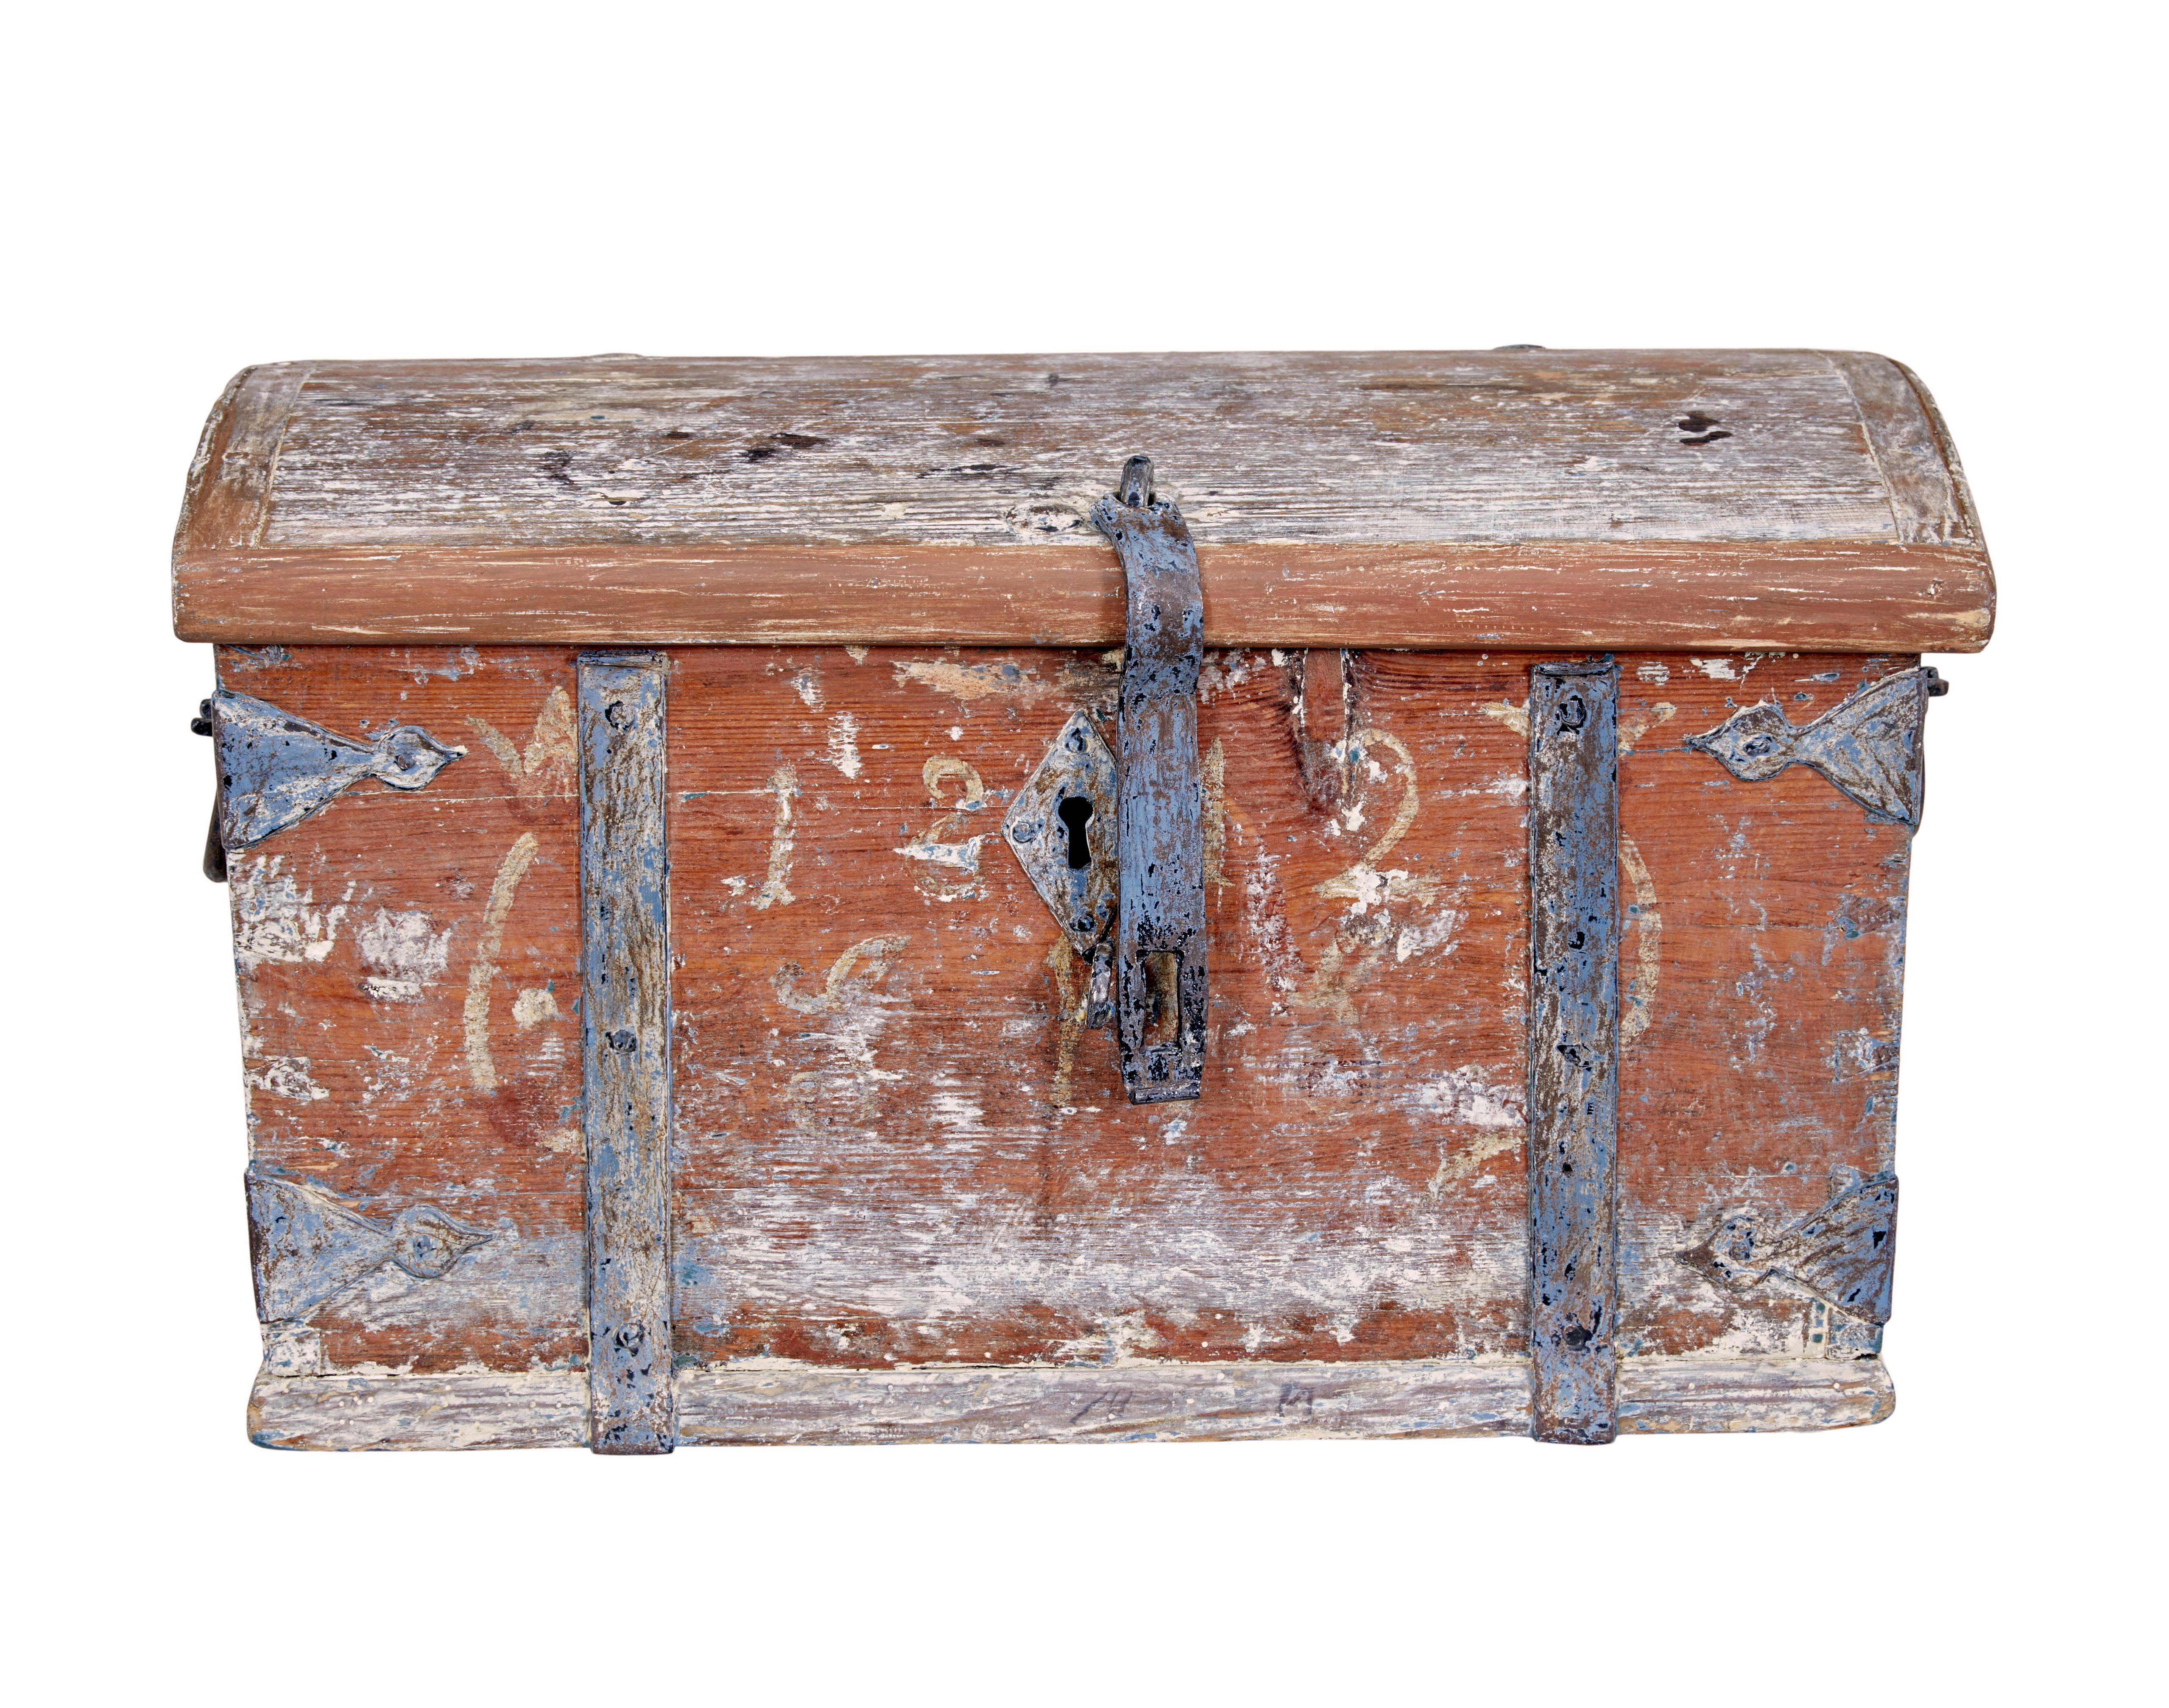 Small mid 19th century swedish painted pine strong box circa 1842.

Beautiful small scandinavian strong box, presented with scraped back paint to reveal original.  Feintly still baring its 1842 date, slight blue wash on the metalwork, contrasting